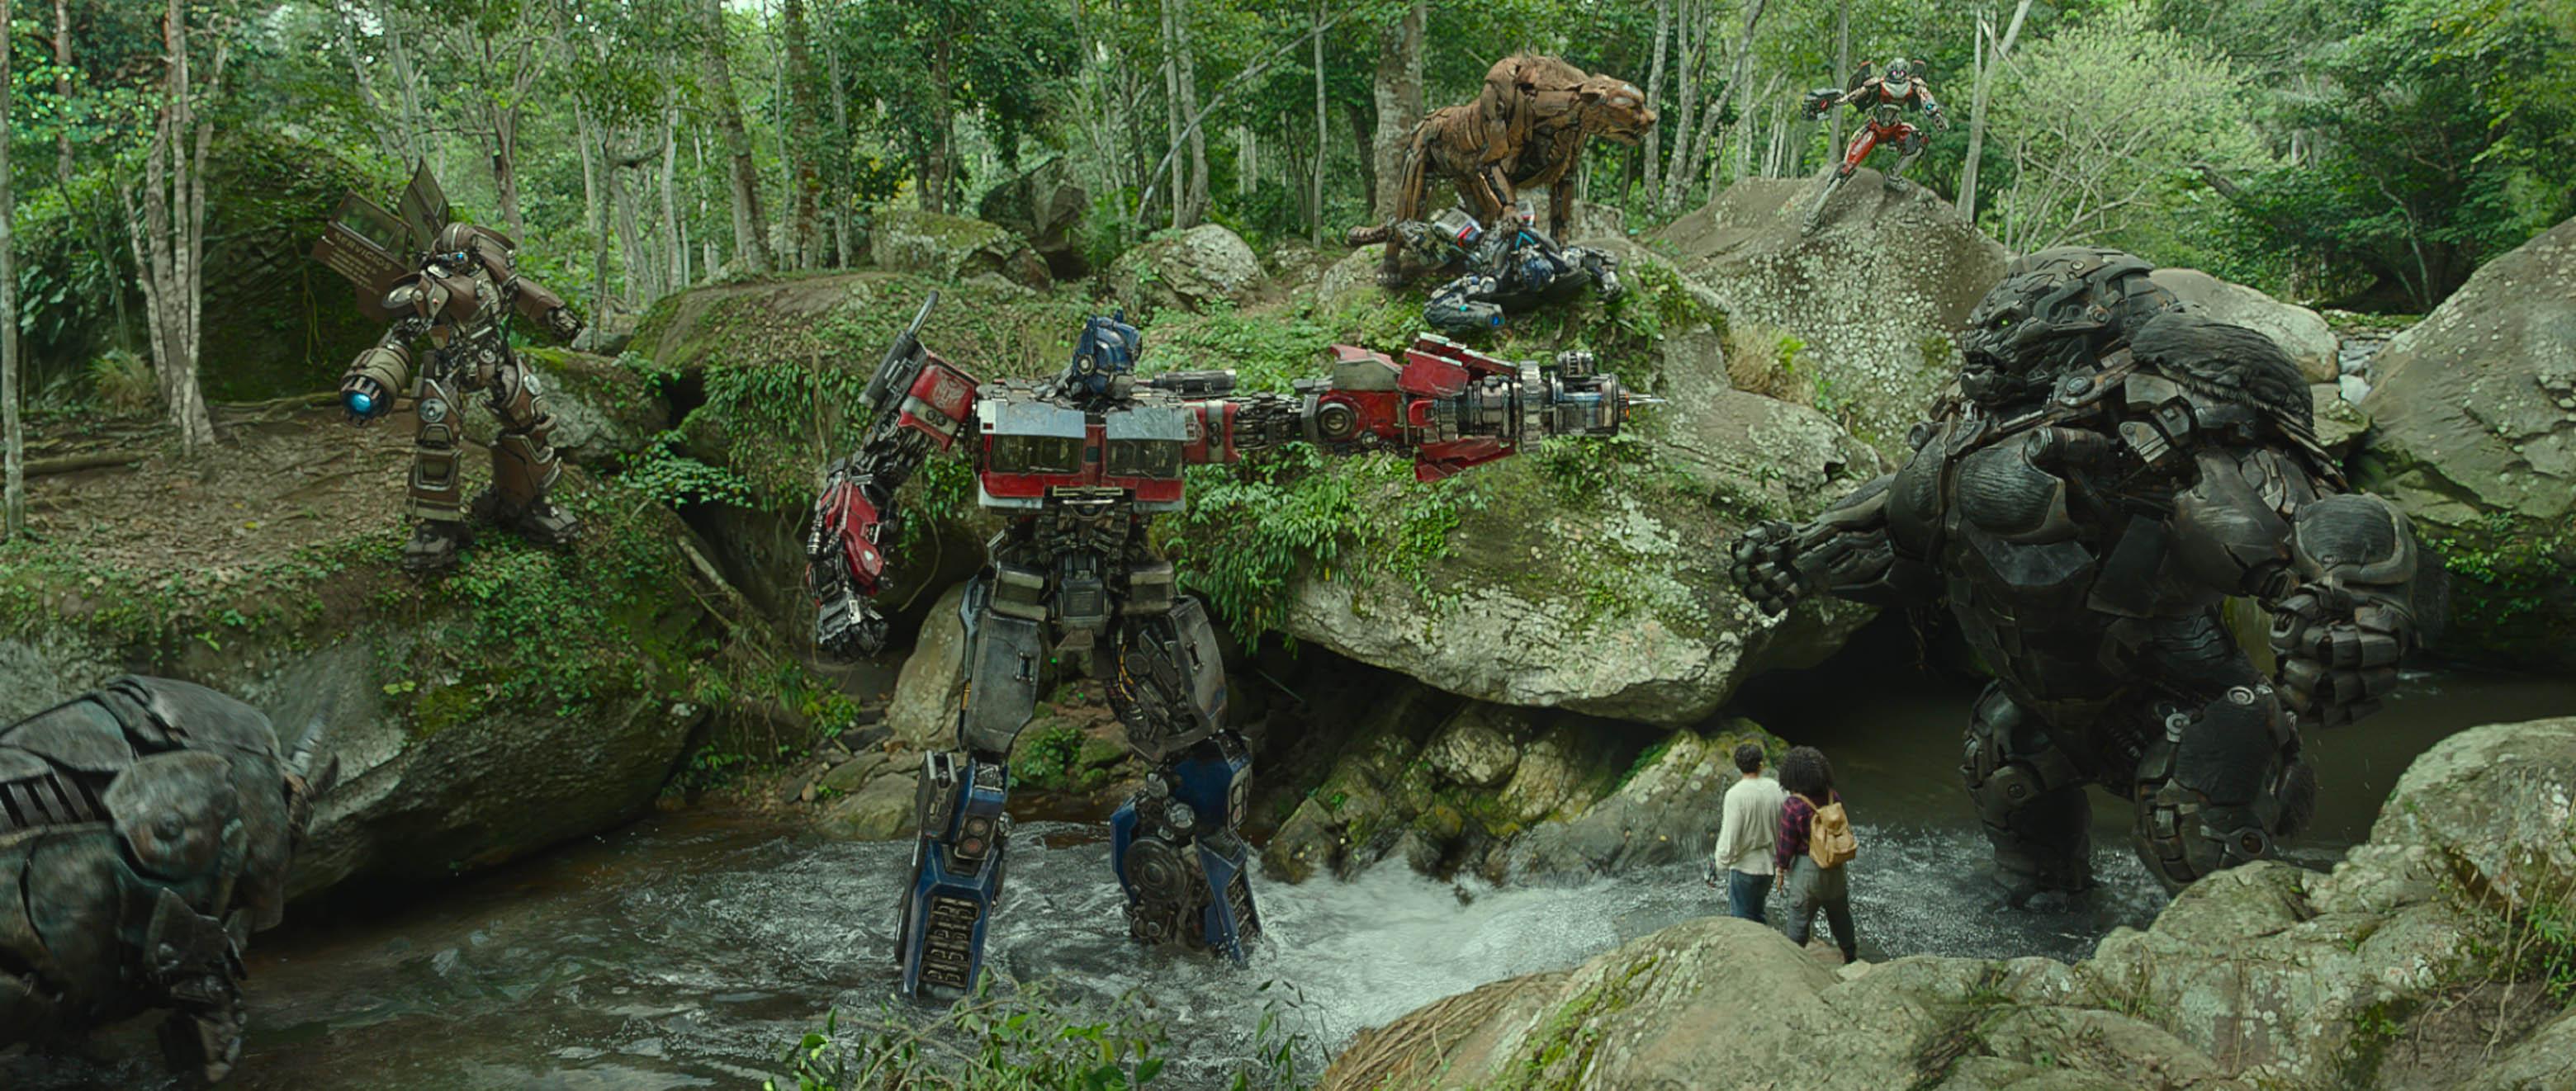 Ron Perlman, Peter Cullen, Pete Davidson, David Sobolov, Tongayi Chirisa, Dominique Fishback, Anthony Ramos, Liza Koshy, and Cristo Fernández in Transformers: Rise of the Beasts (2023)